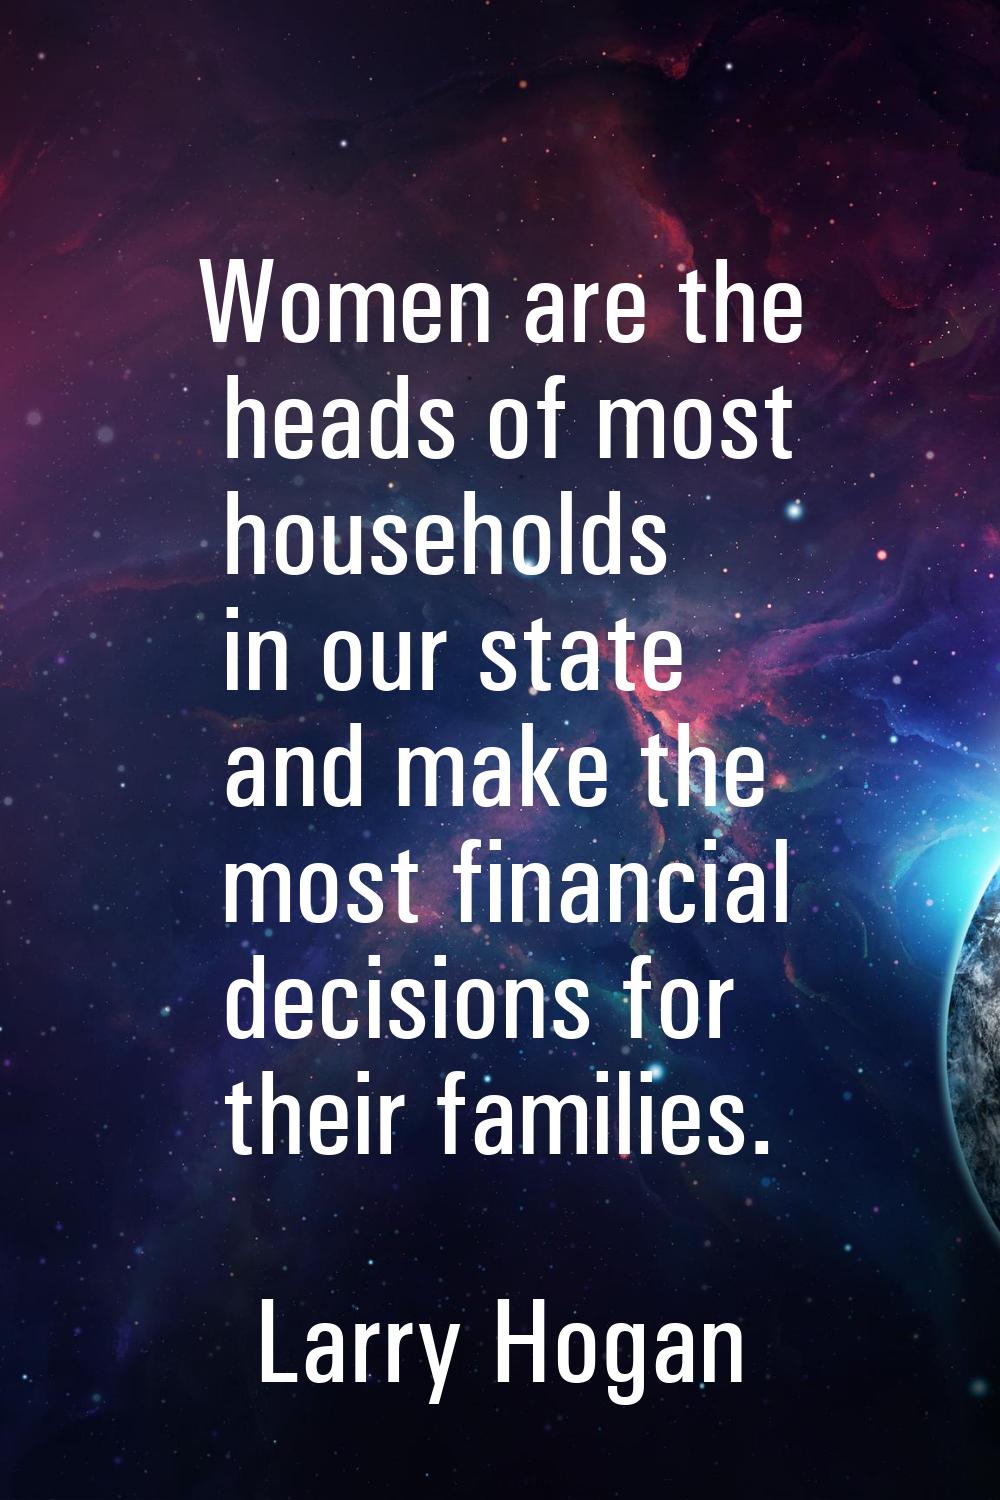 Women are the heads of most households in our state and make the most financial decisions for their